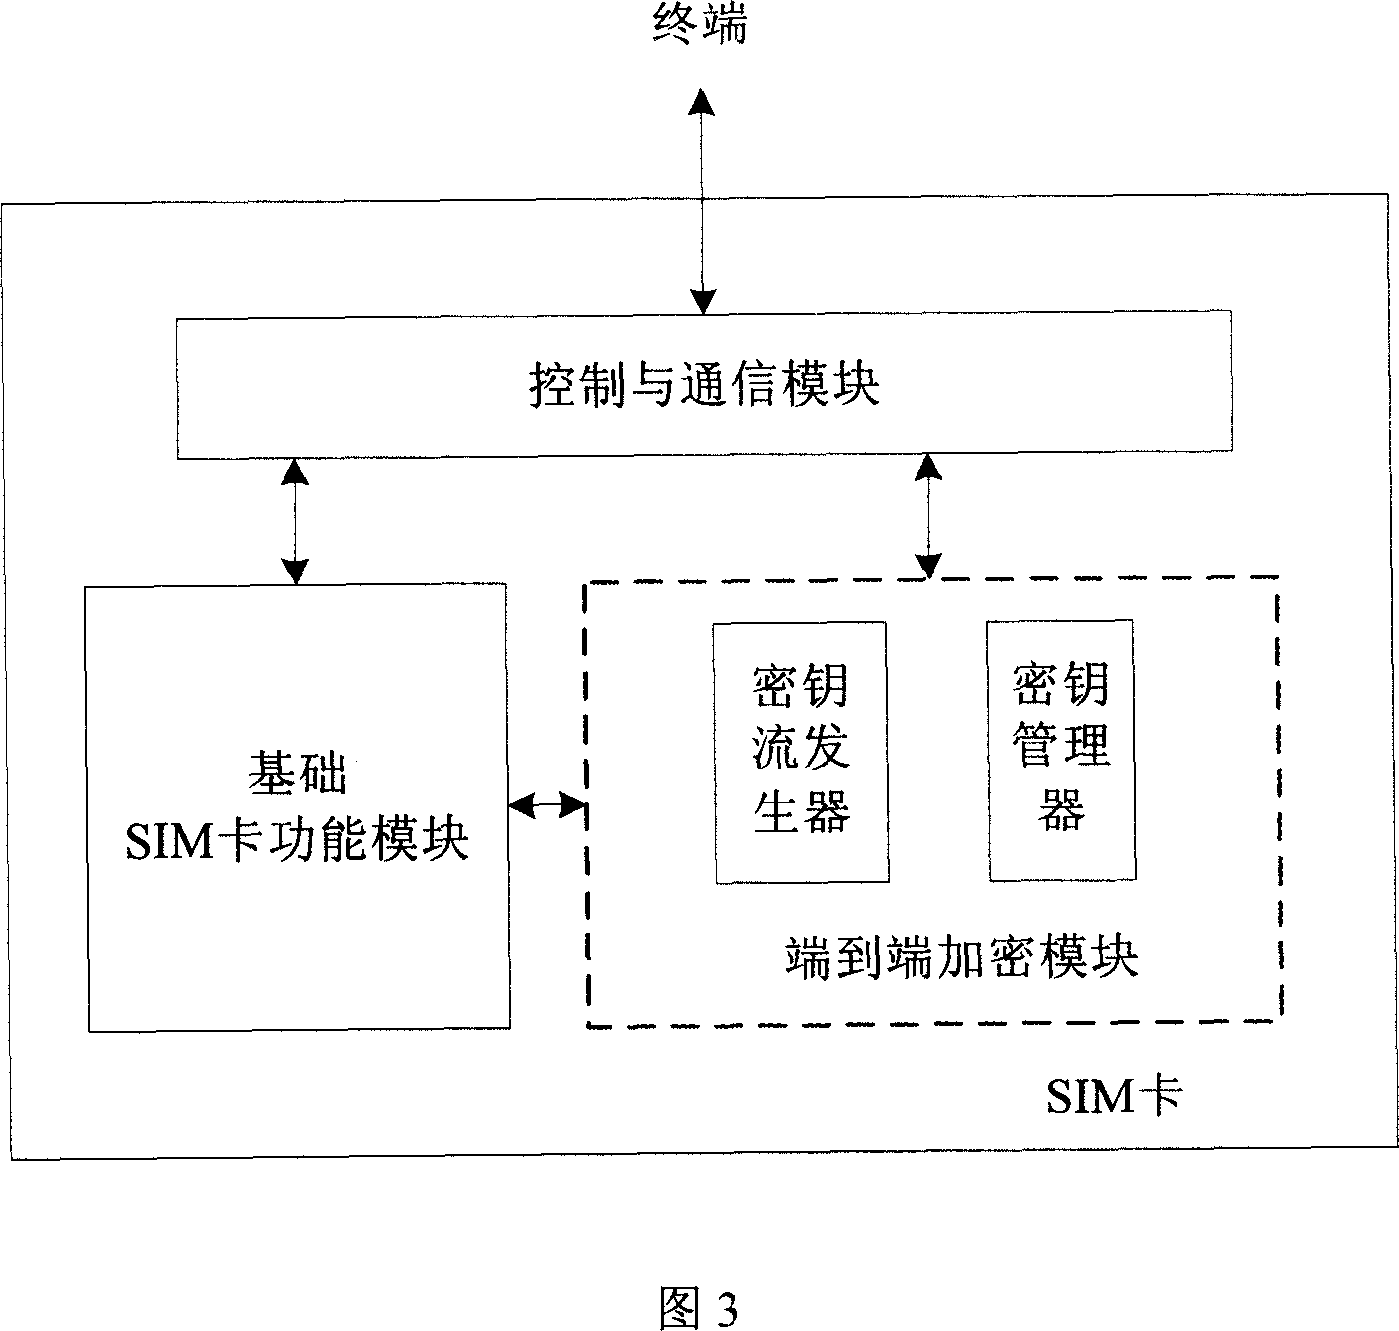 End-to-end encrypting method and system based on mobile communication network